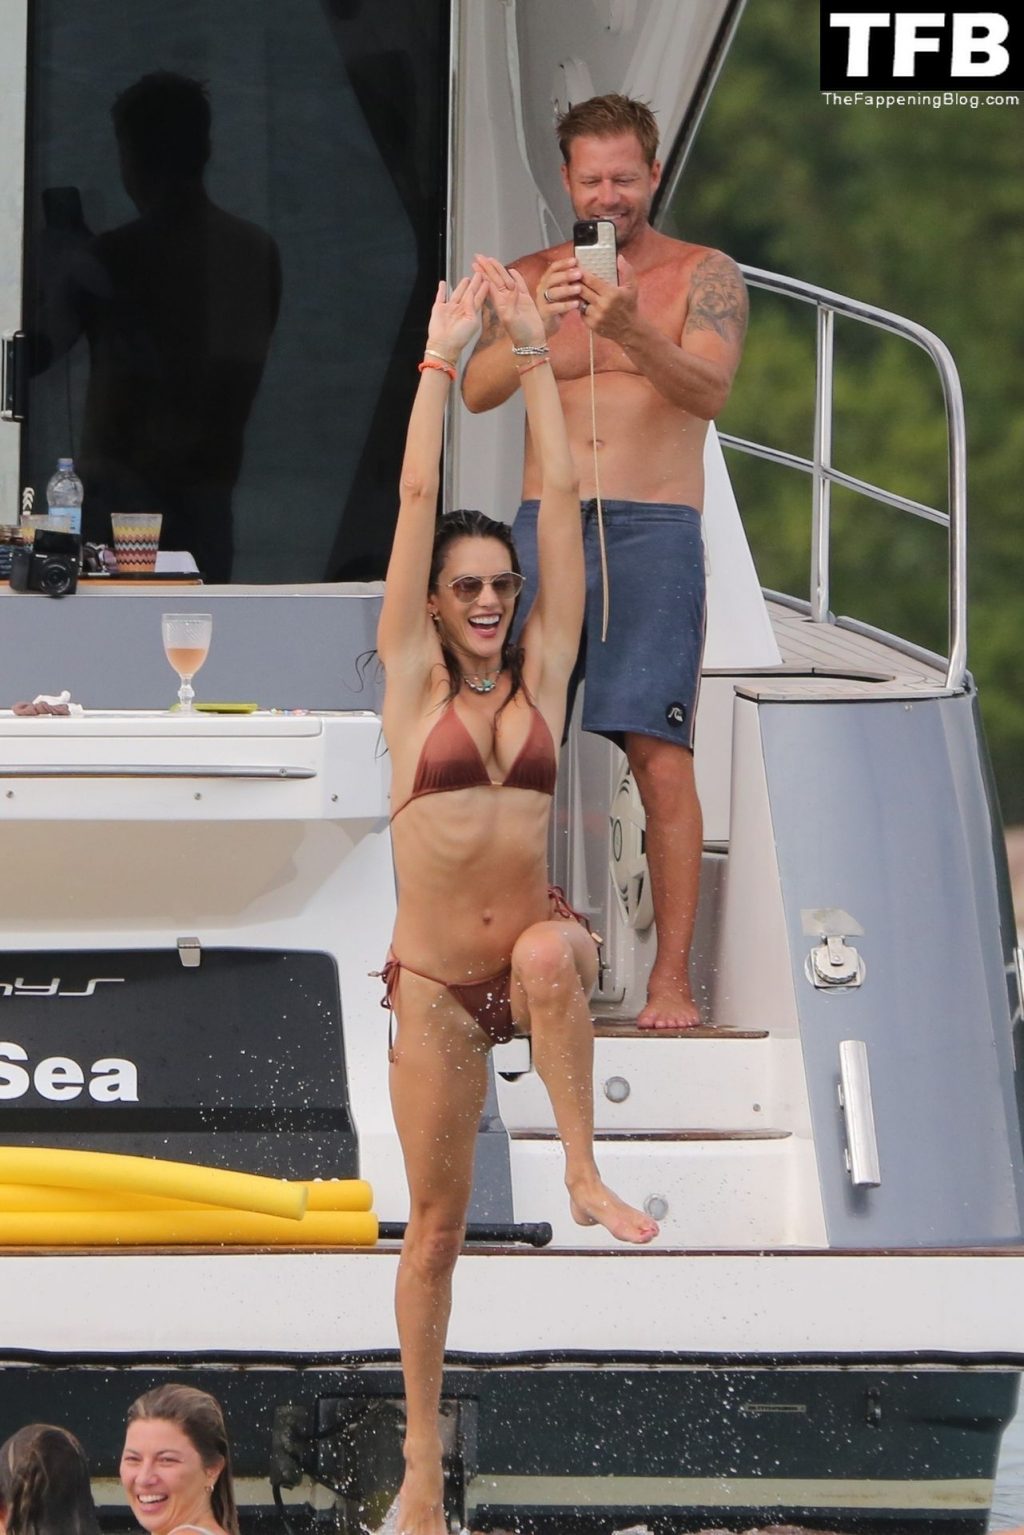 Alessandra Ambrosio Showcases Her Model Figure While Dancing With Friends on Board a Yacht (121 Photos)